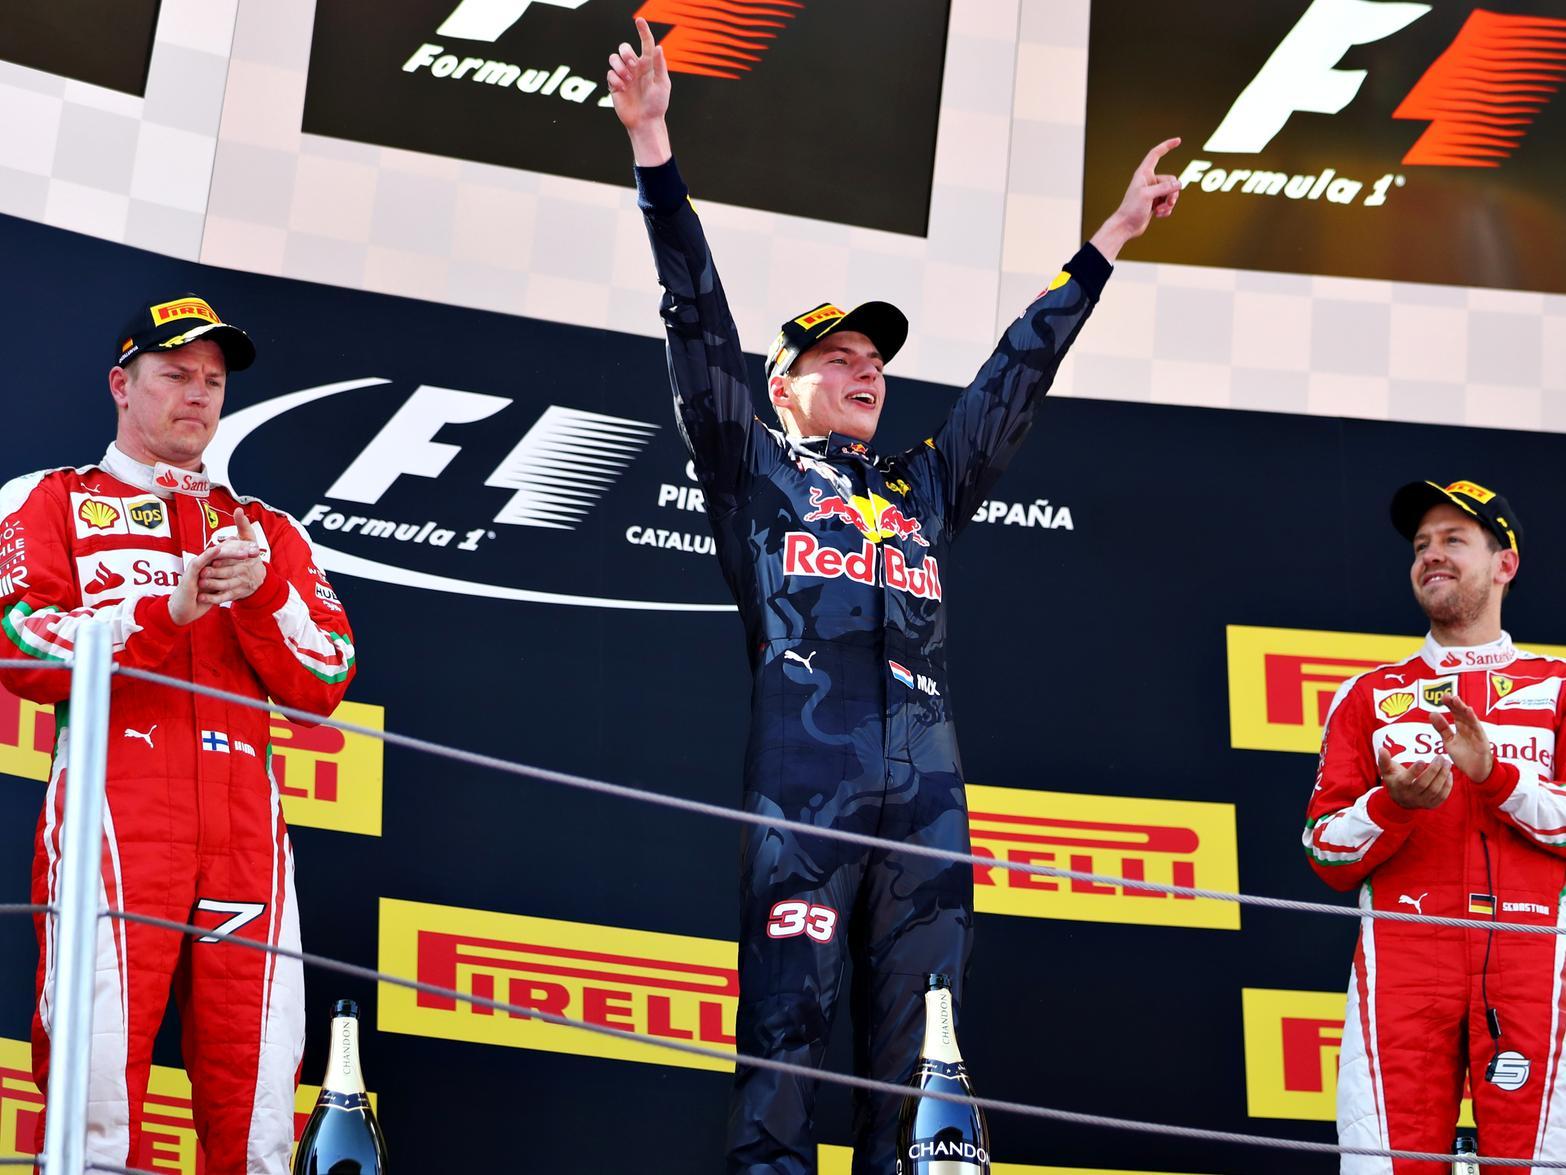 After Red Bull swapped Verstappen in for Daniil Kvyat ahead of the Spanish Grand Prix few could have predicted the Dutchman would win his first race!